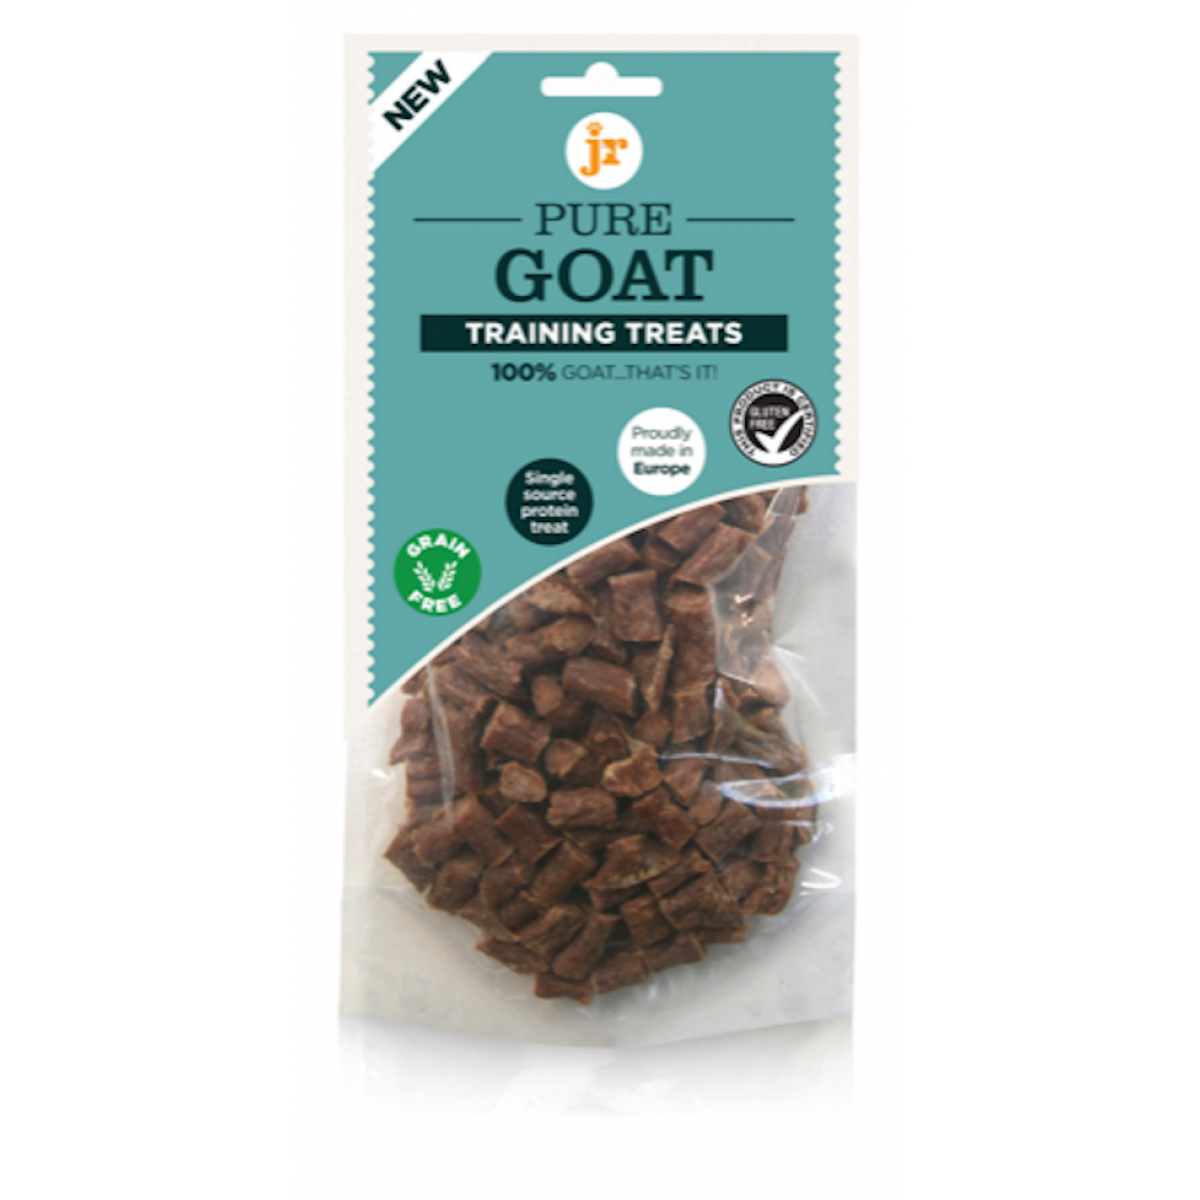 JR - The Absolute Ultimate Pure Range Goat Training Treats 85g